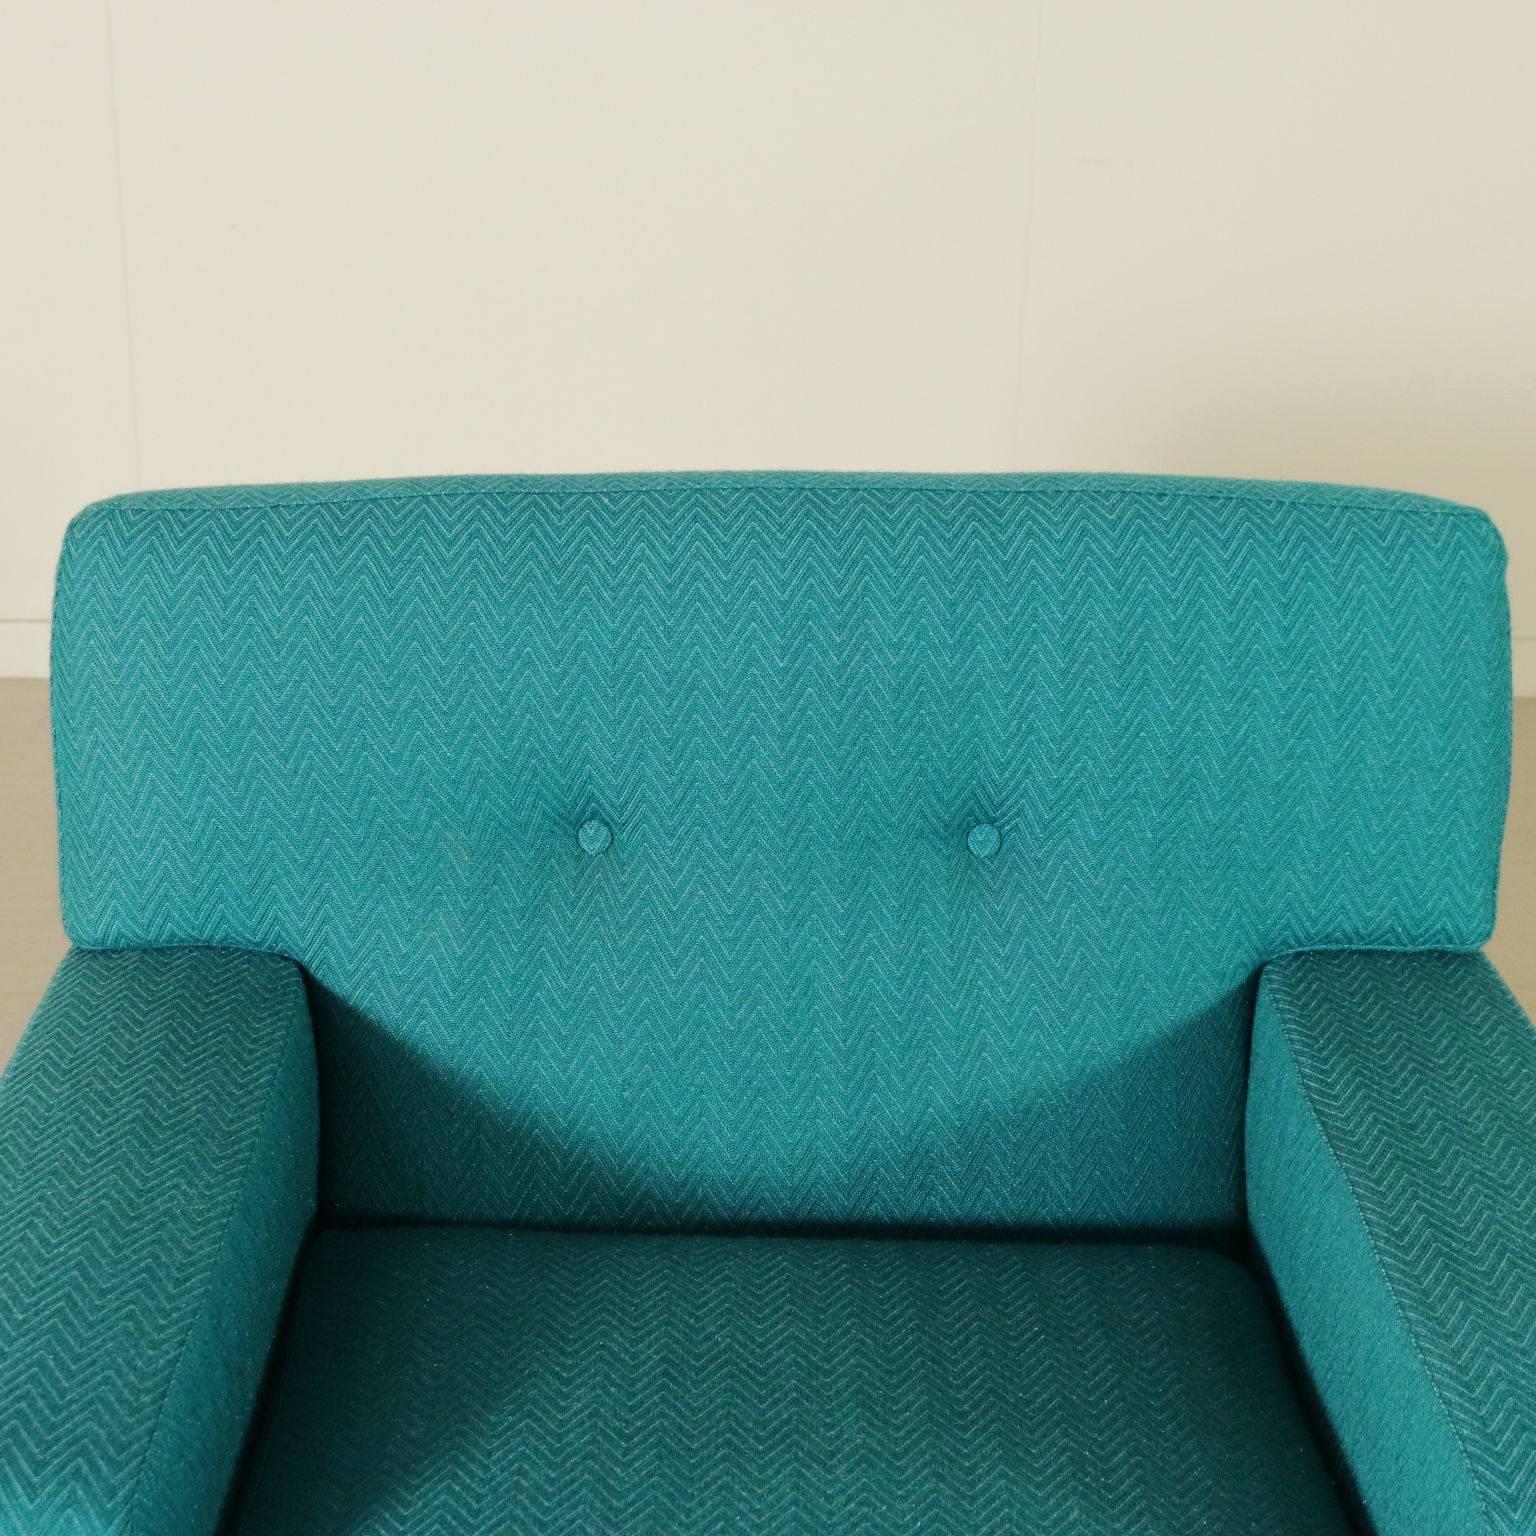 A pair of armchairs designed by Marco Zanuso for Arflex in 1962. Foam latex, fabric upholstery. Model: Square. Manufactured in Giussano, Italy, 1970s-1980s.